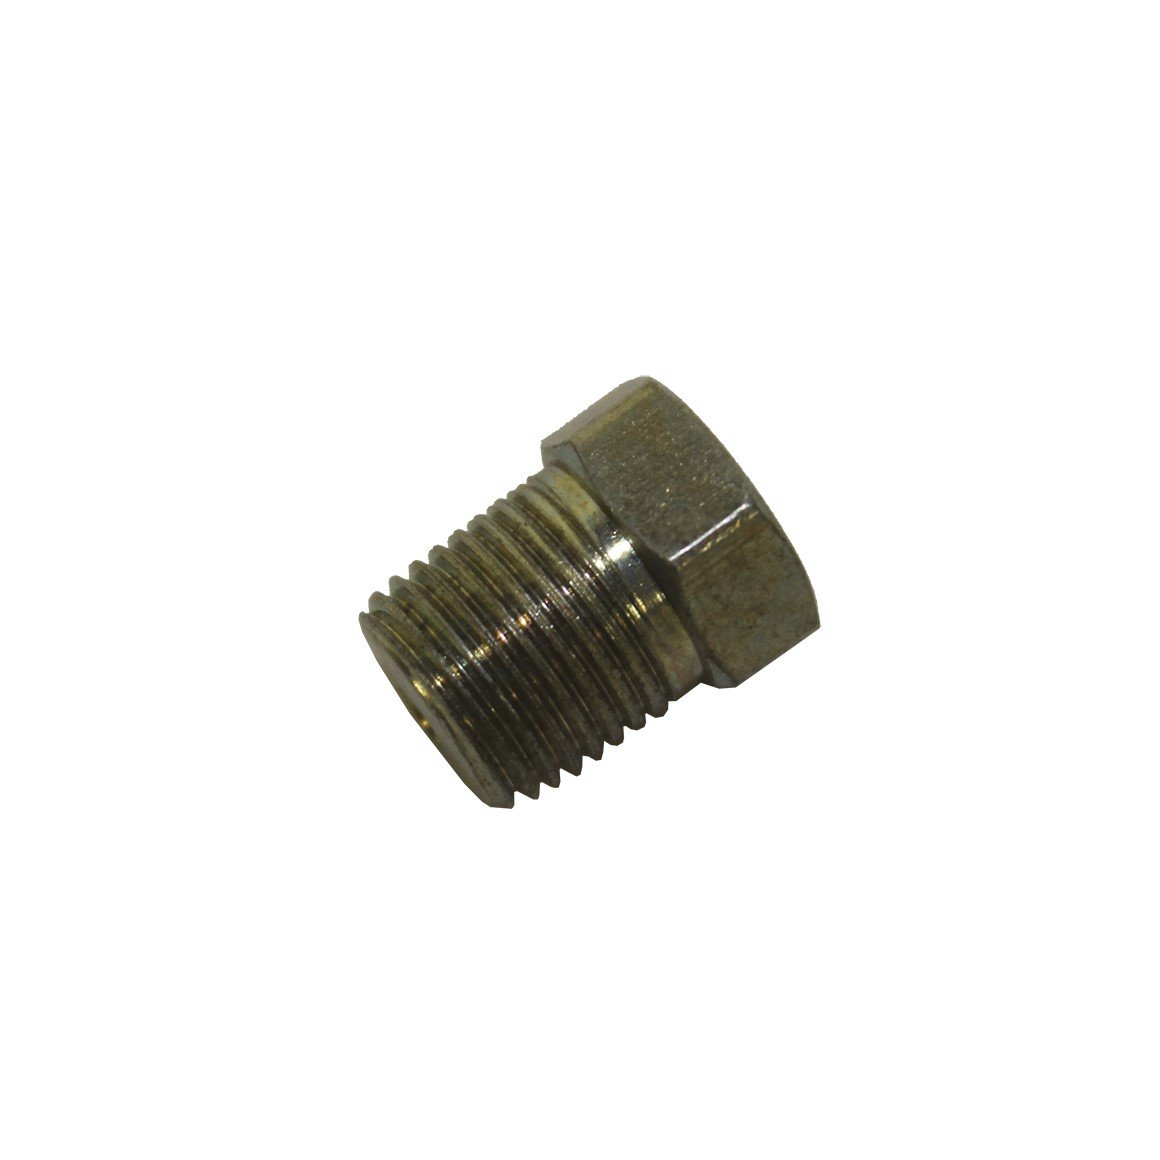 50 - Falcon And Roller Slide Bleeder Screw 1/8 Mpt Adapter Fitting Win65314